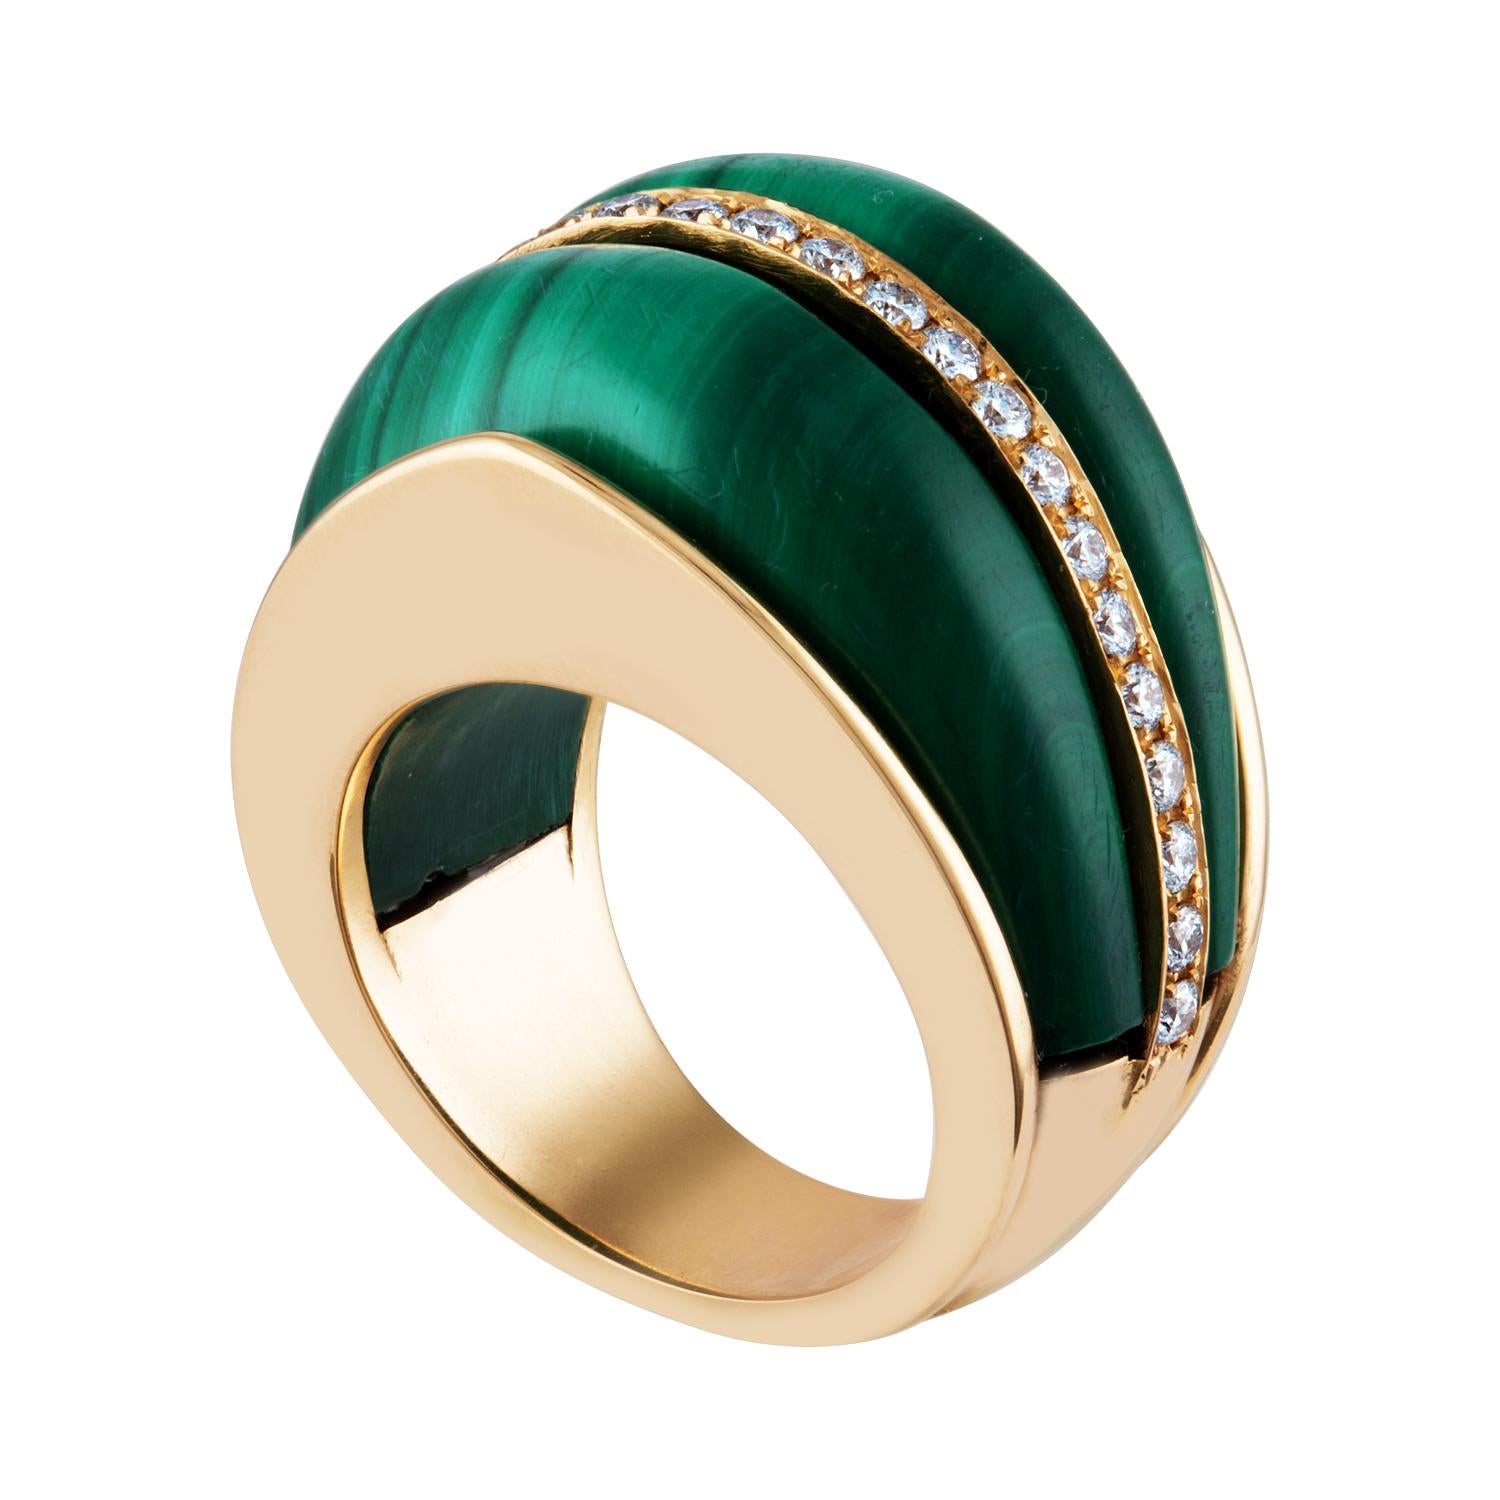 Very Unusual Cathedral Arch Dome Statement Ring
The ring is 14K Yellow Gold
There are 0.56 Carats in Diamonds F/G VS/SI
Beautiful Malachite Dome Stones Flank Diamond Band
The ring is a size 6.50, not sizable
The ring weighs 23.7 grams.